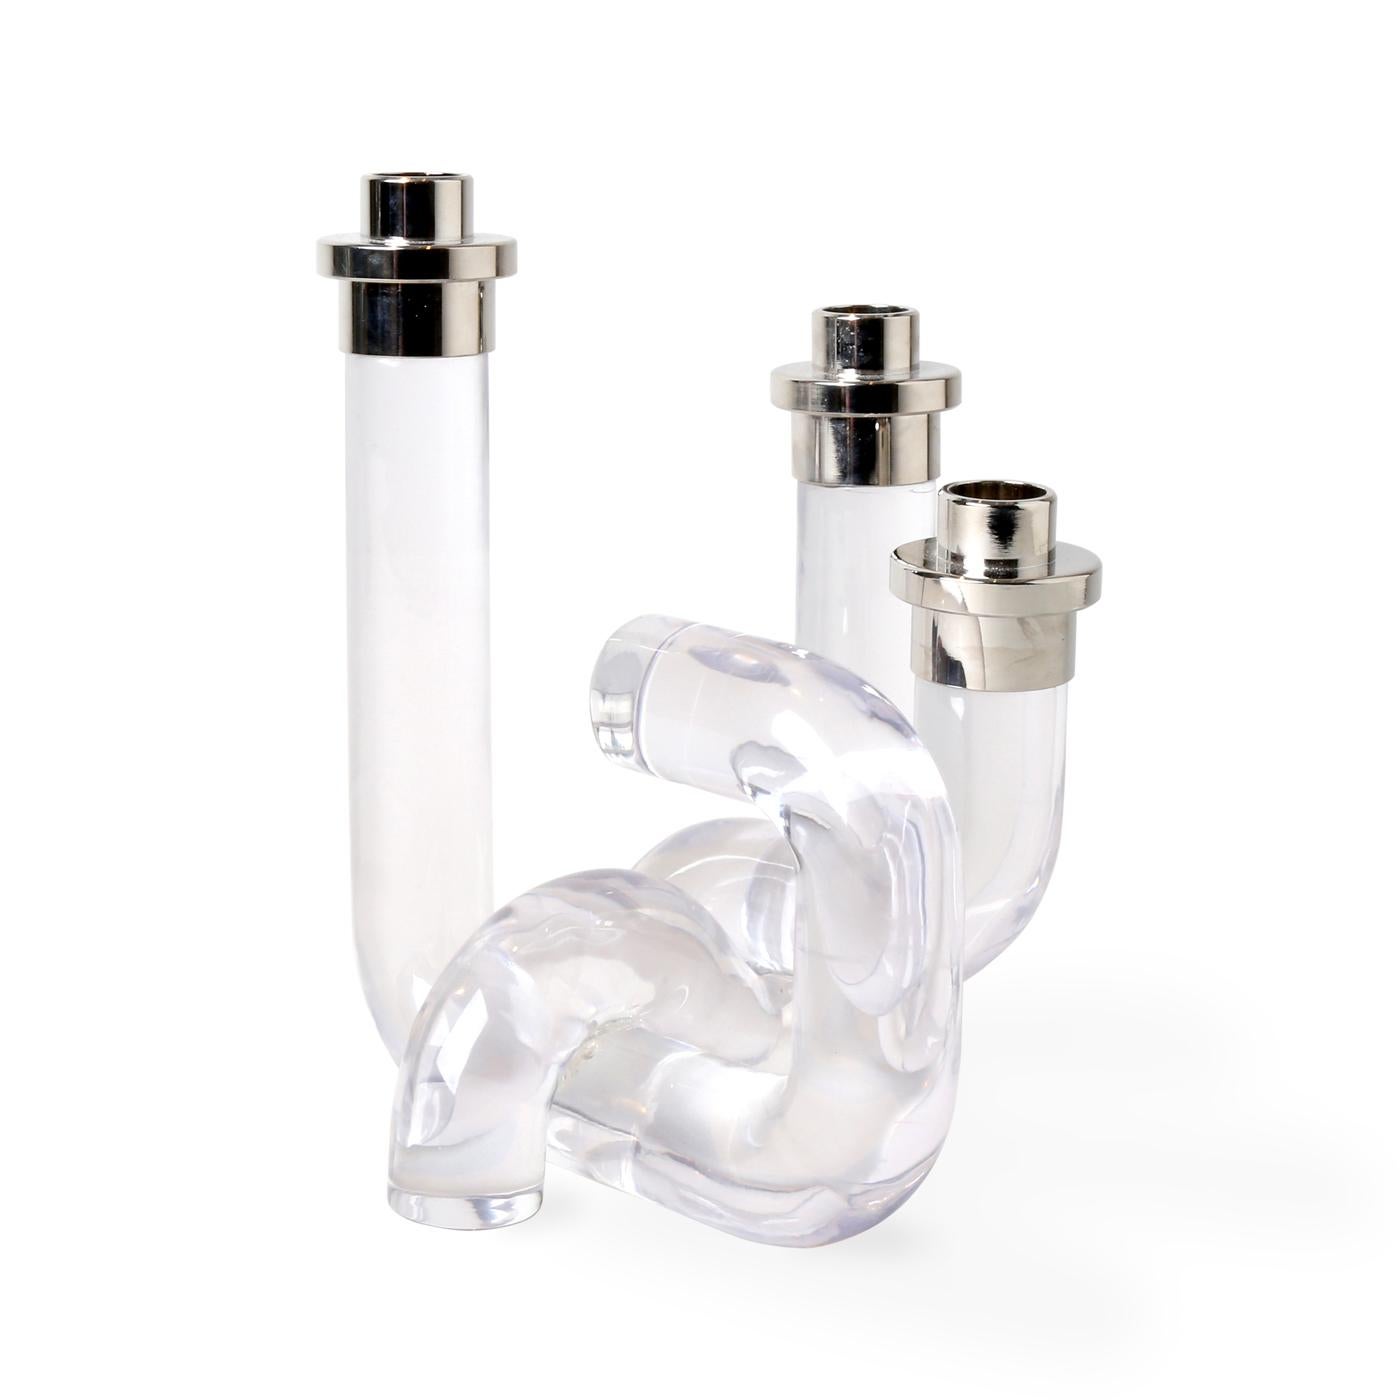 Pipe Up. Our Pompidou Candleholders pair 70s-inspired patterns with daring dimension for added ooomph. Featuring solid acrylic pipes fused together and accented with polished nickel. Chic clear lucite creates a modern glow to match any mood. Also